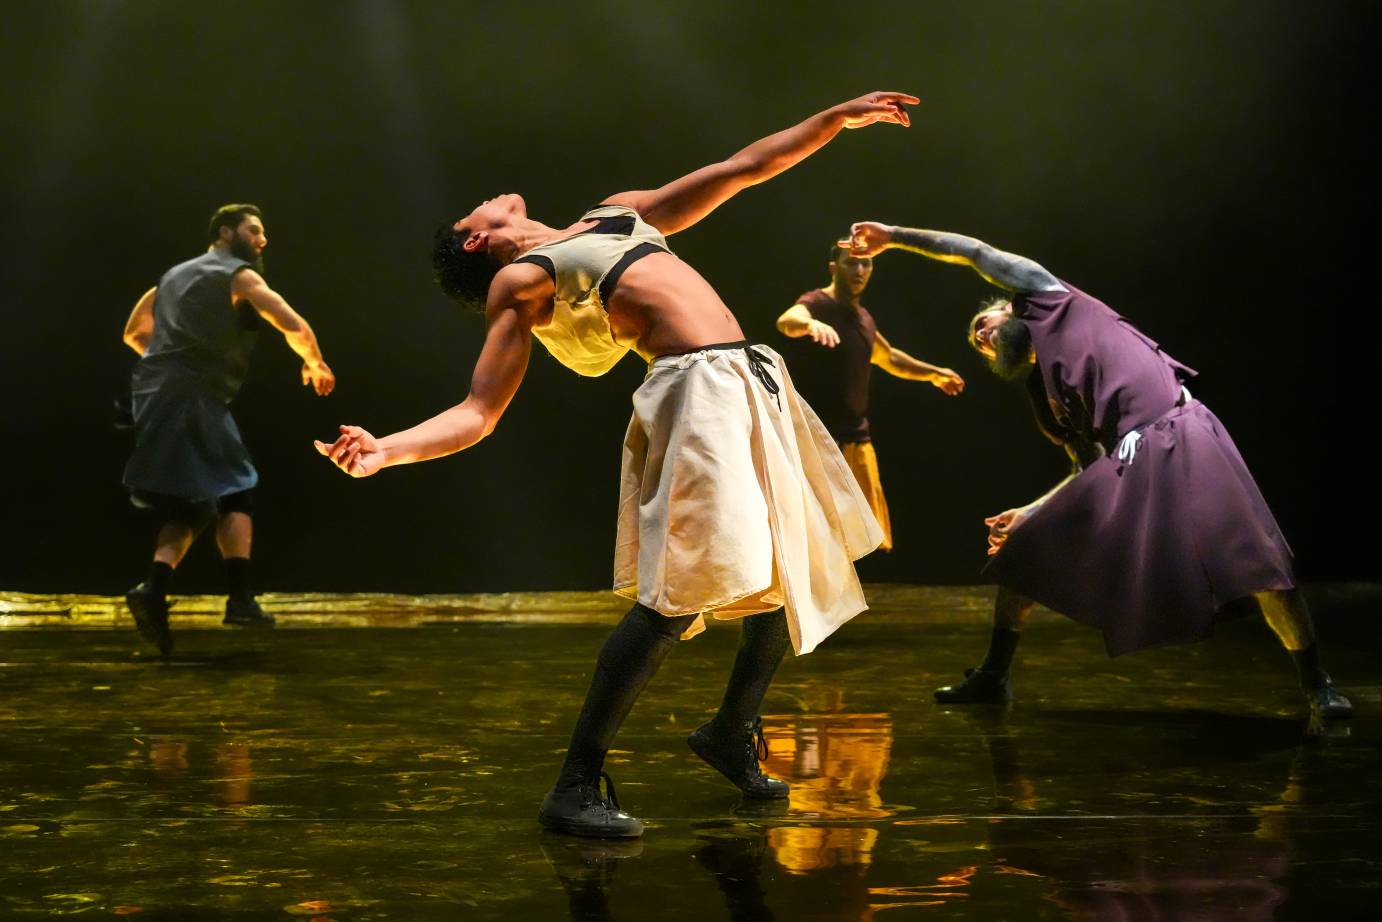 four dancers in a beautiful configuration of movement, The central figure in white leans backwards exposing muscles in their arms and stomaches